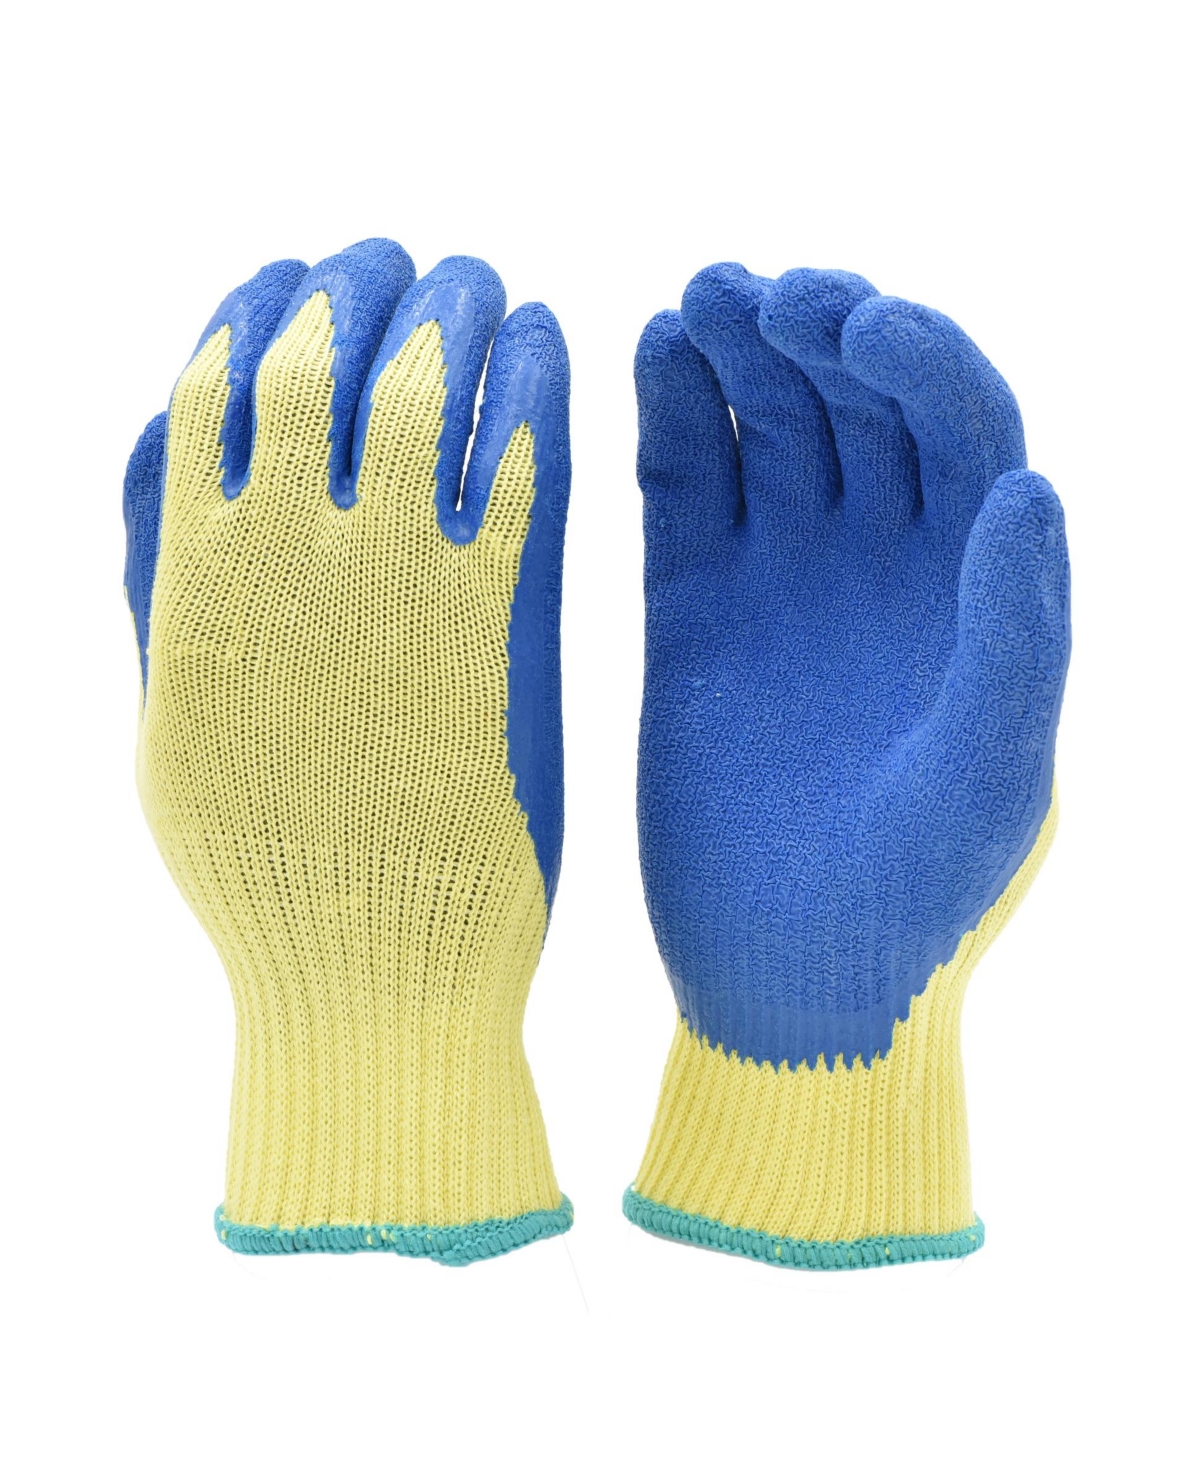 Latex Coated Cut Resistant Work Gloves - Blue